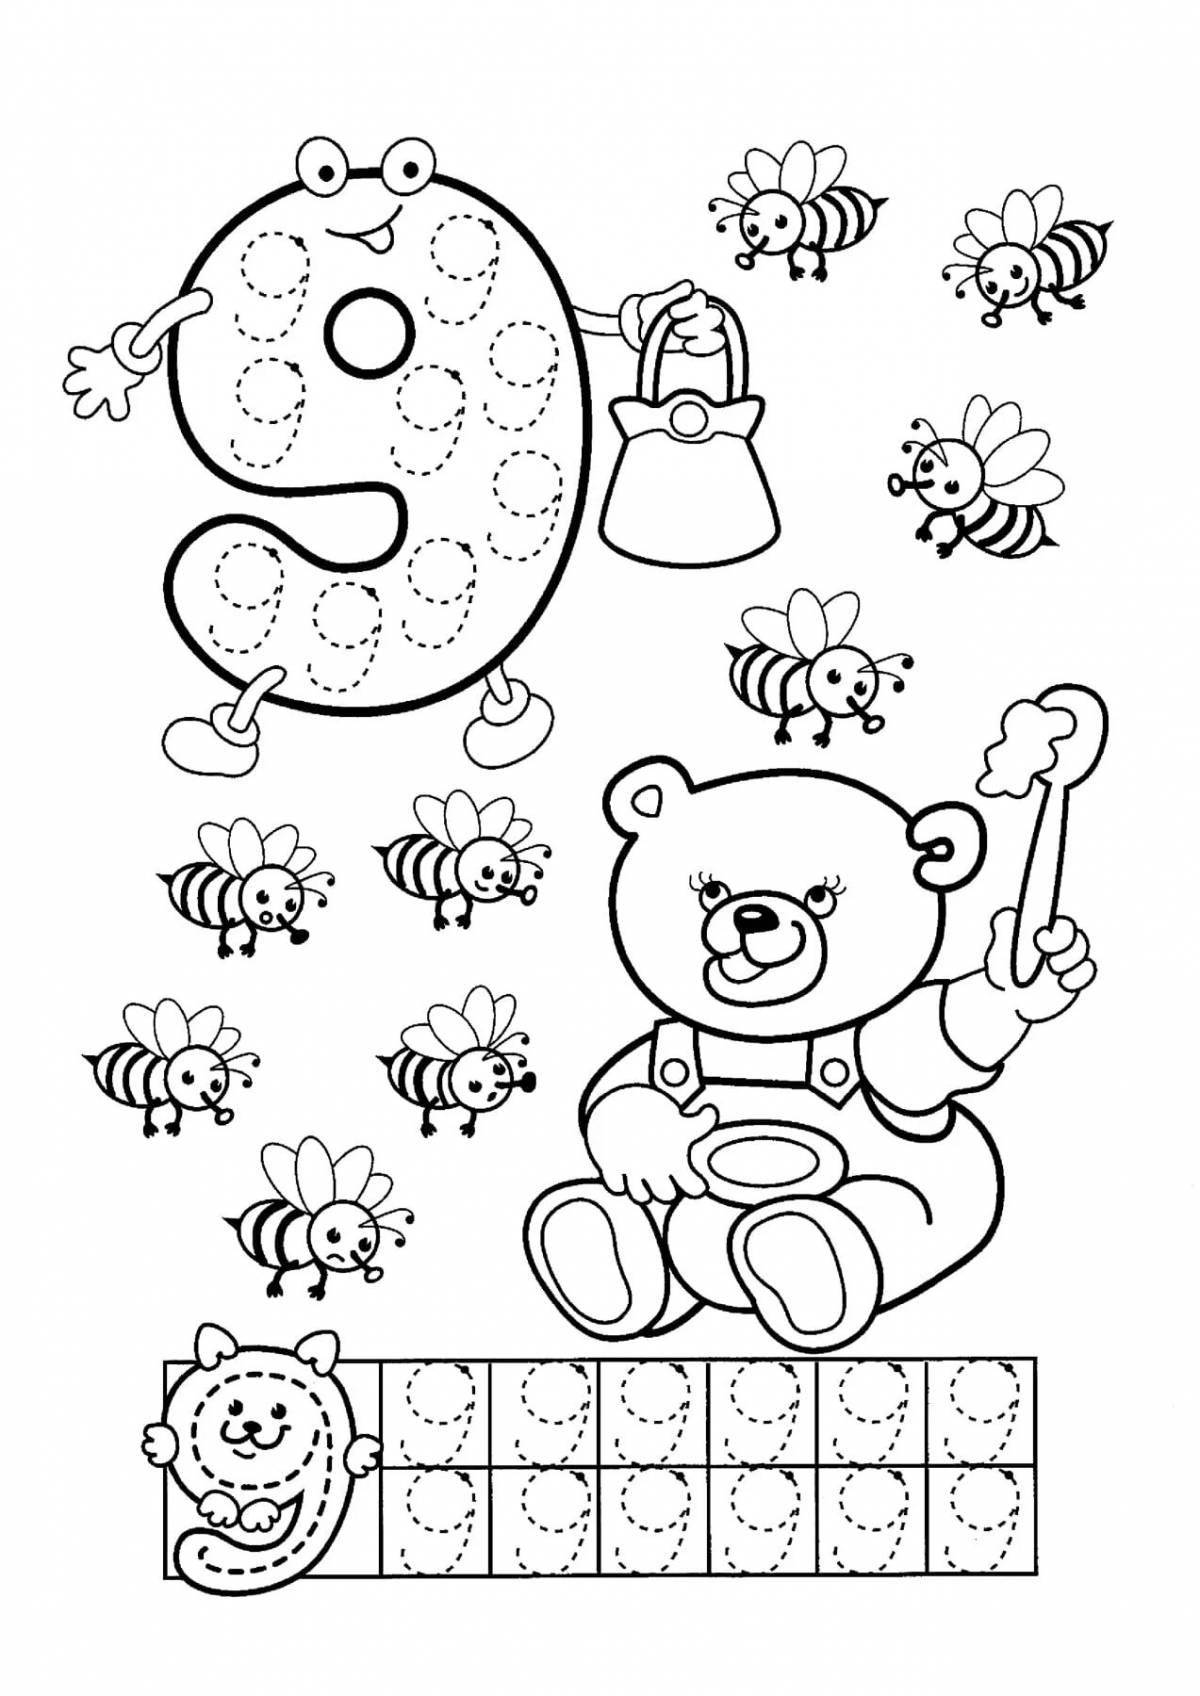 Coloring book with awesome numbers